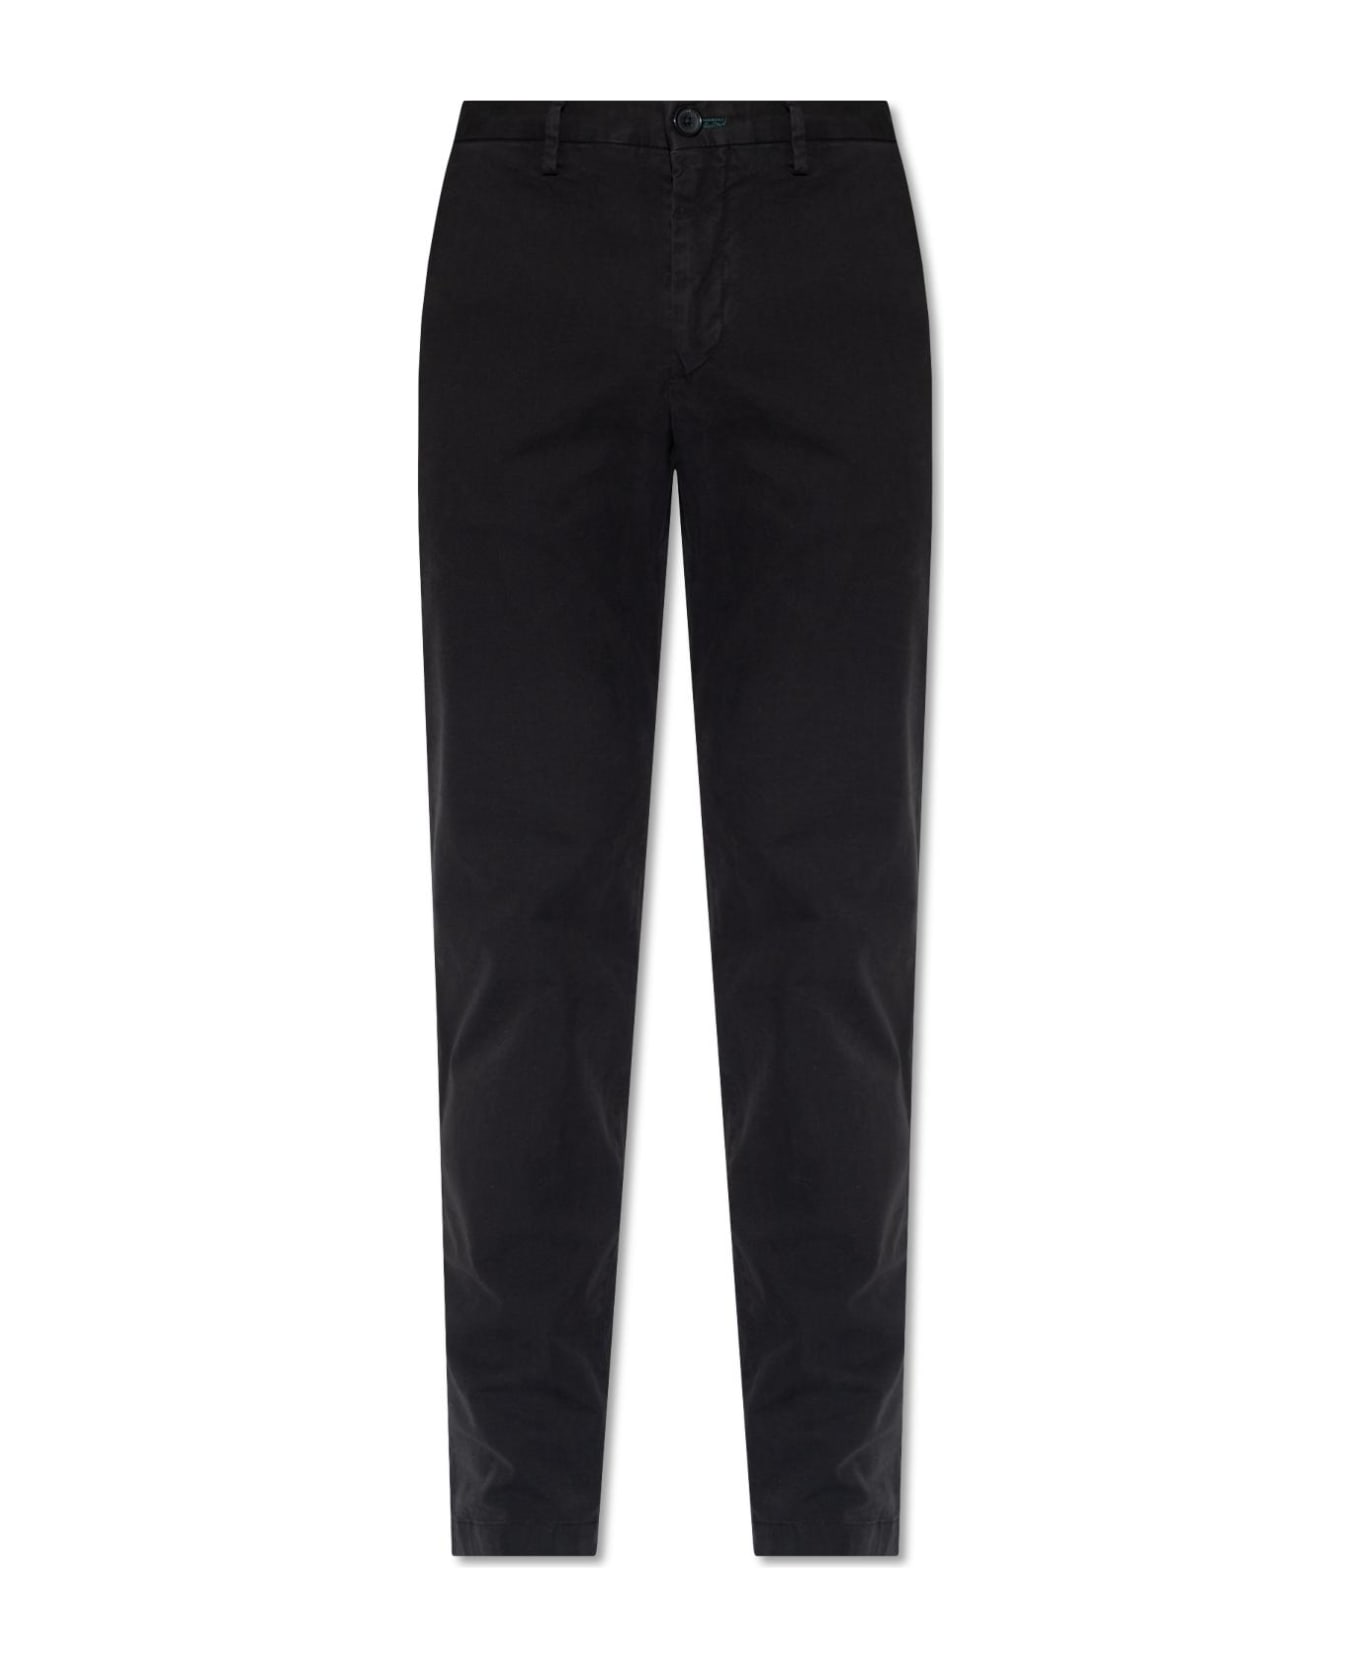 Paul Smith Cotton Trousers - BLACK ボトムス